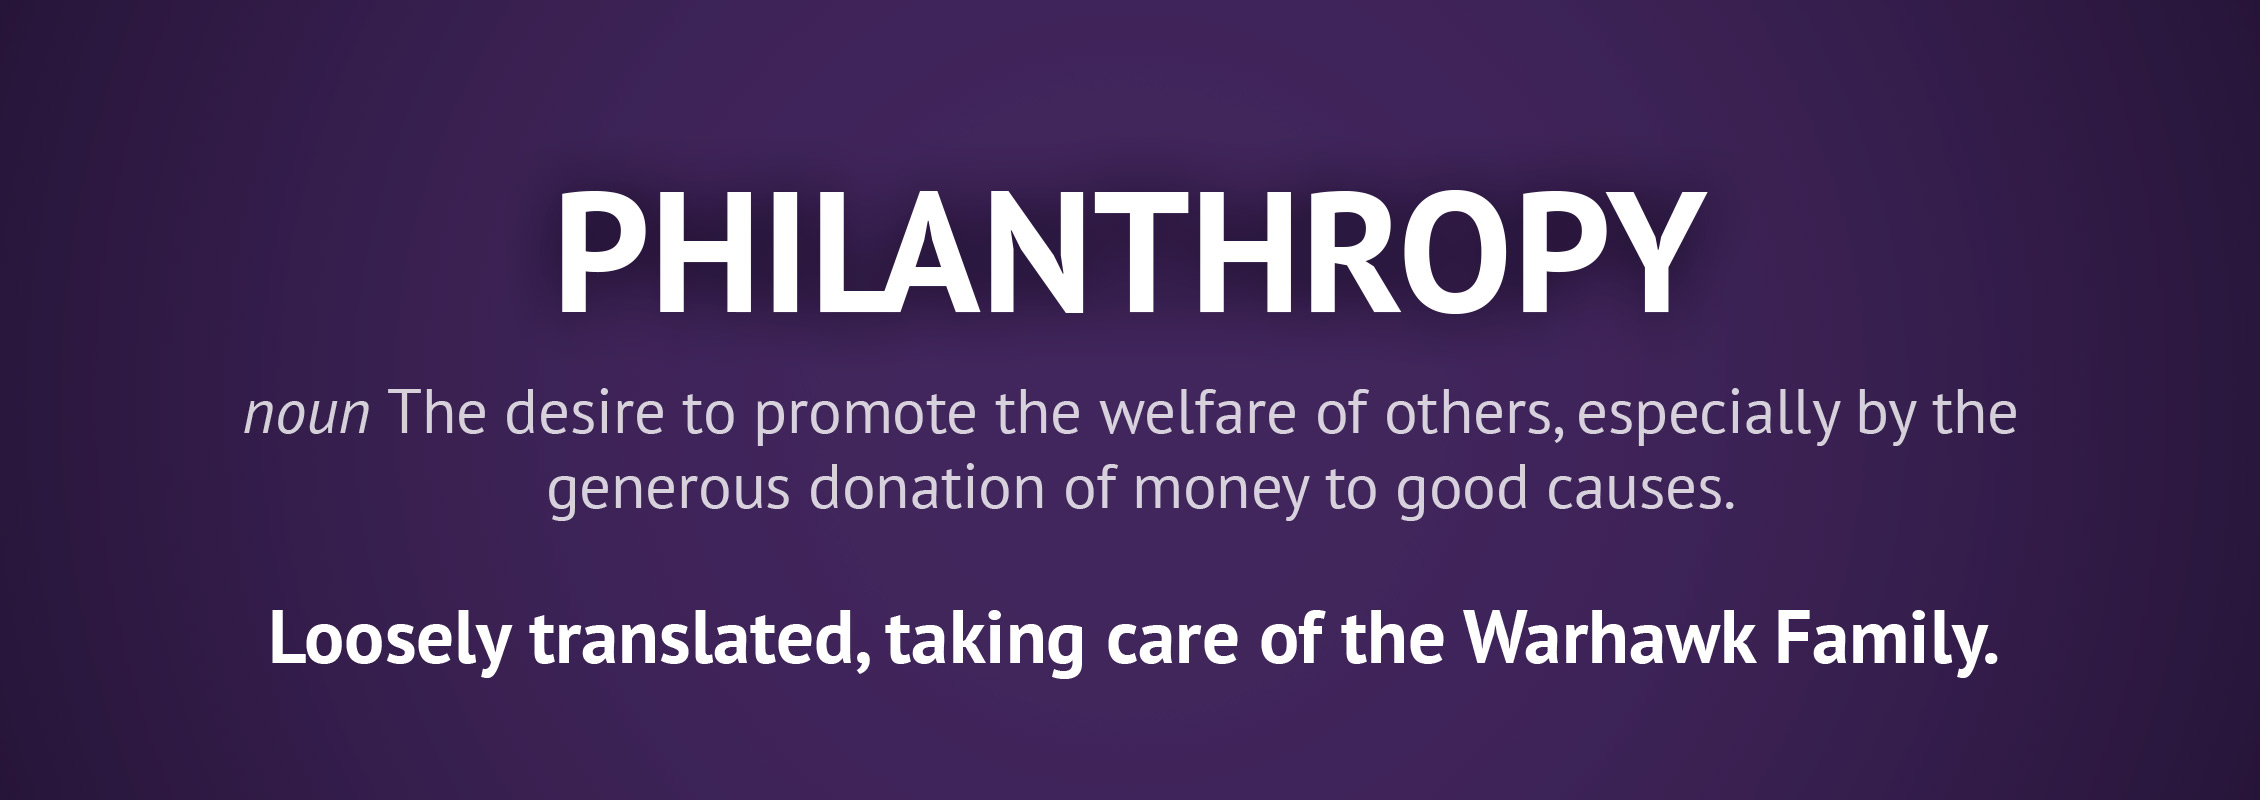 Philanthropy, loosely translated, is taking care of the Warhawk family